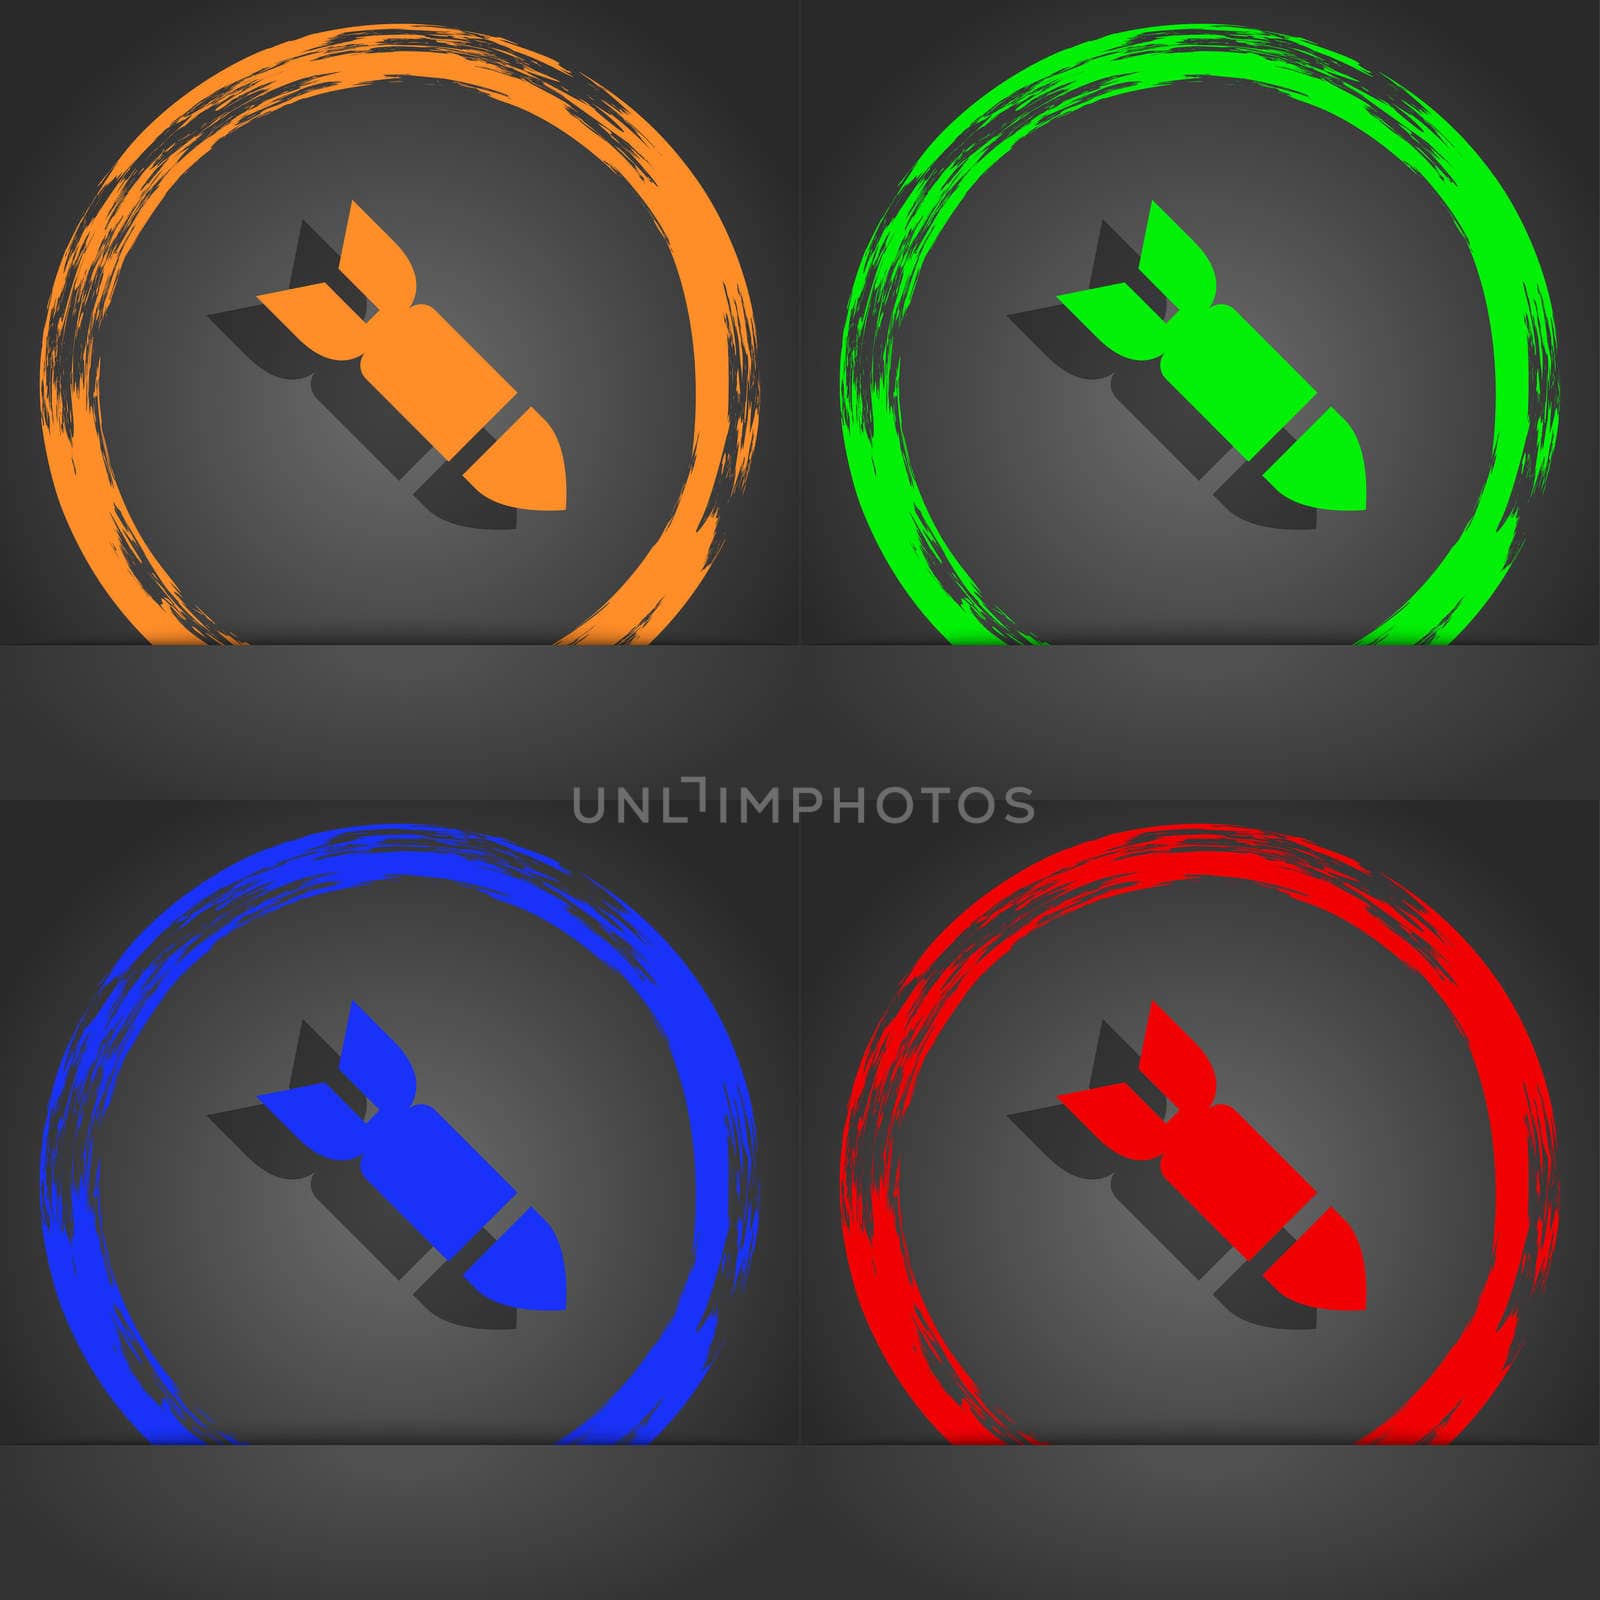 Missile,Rocket weapon icon symbol. Fashionable modern style. In the orange, green, blue, green design.  by serhii_lohvyniuk